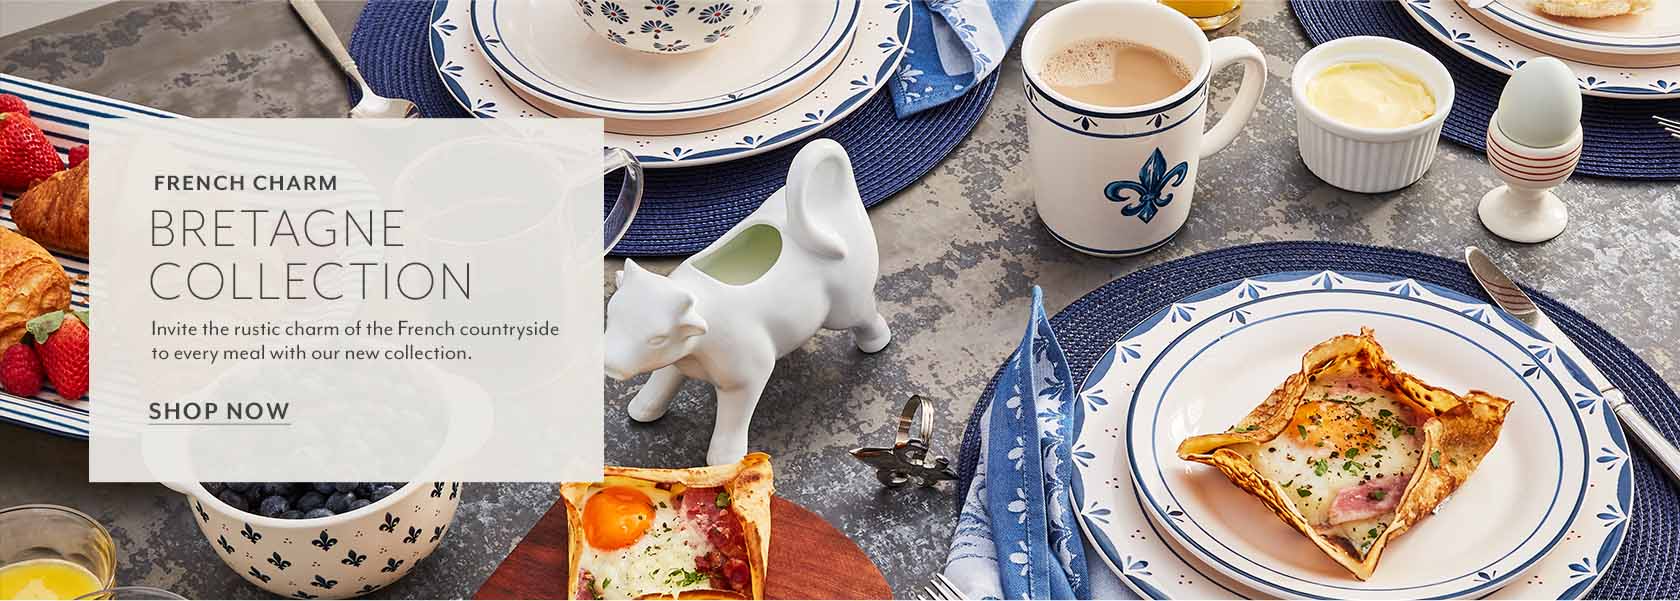 Bretagne blue and white dinnerare and linens. Shop Now.